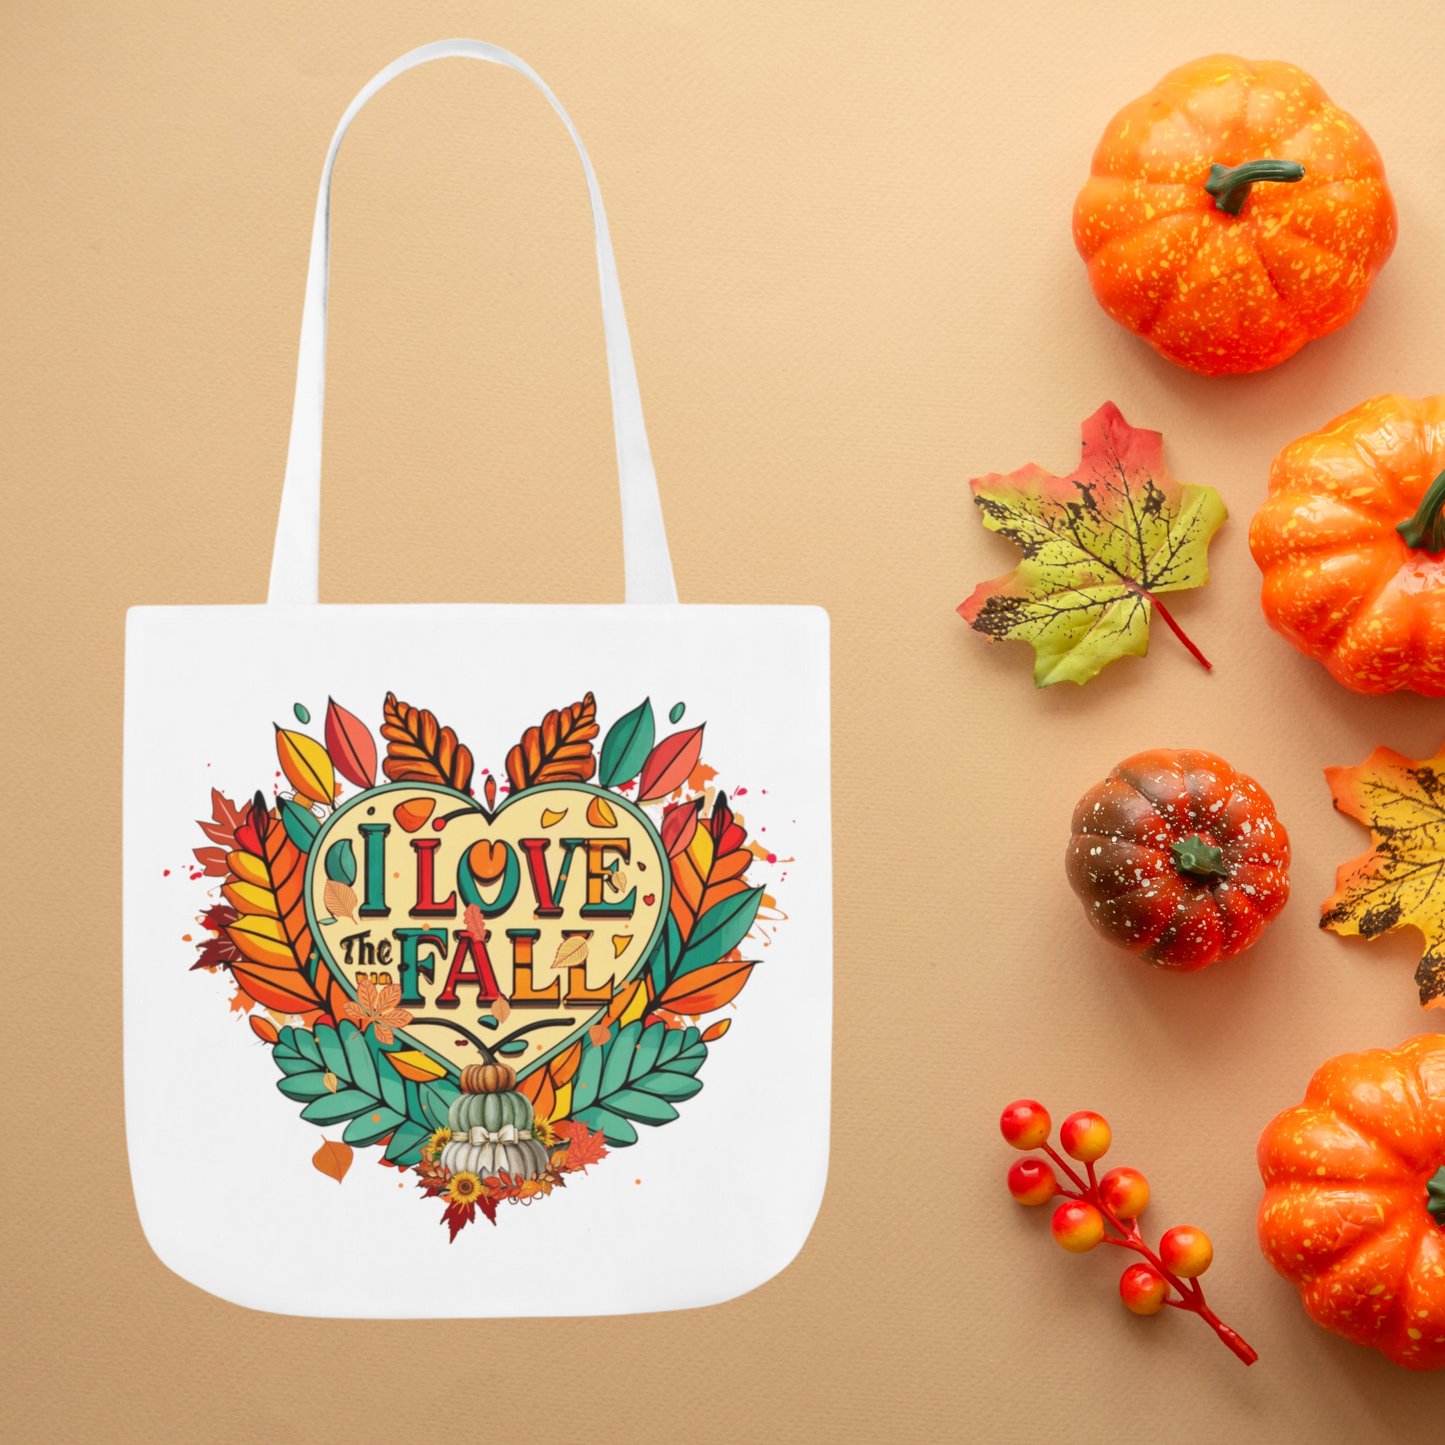 Love Fall Tote Bag - Pumpkin Style, Fall Shoulder Chic, Autumn Vibes, Theme Tote, Leaves Elegance, Gift for Her - Stylish Shopping Companion Accessories   